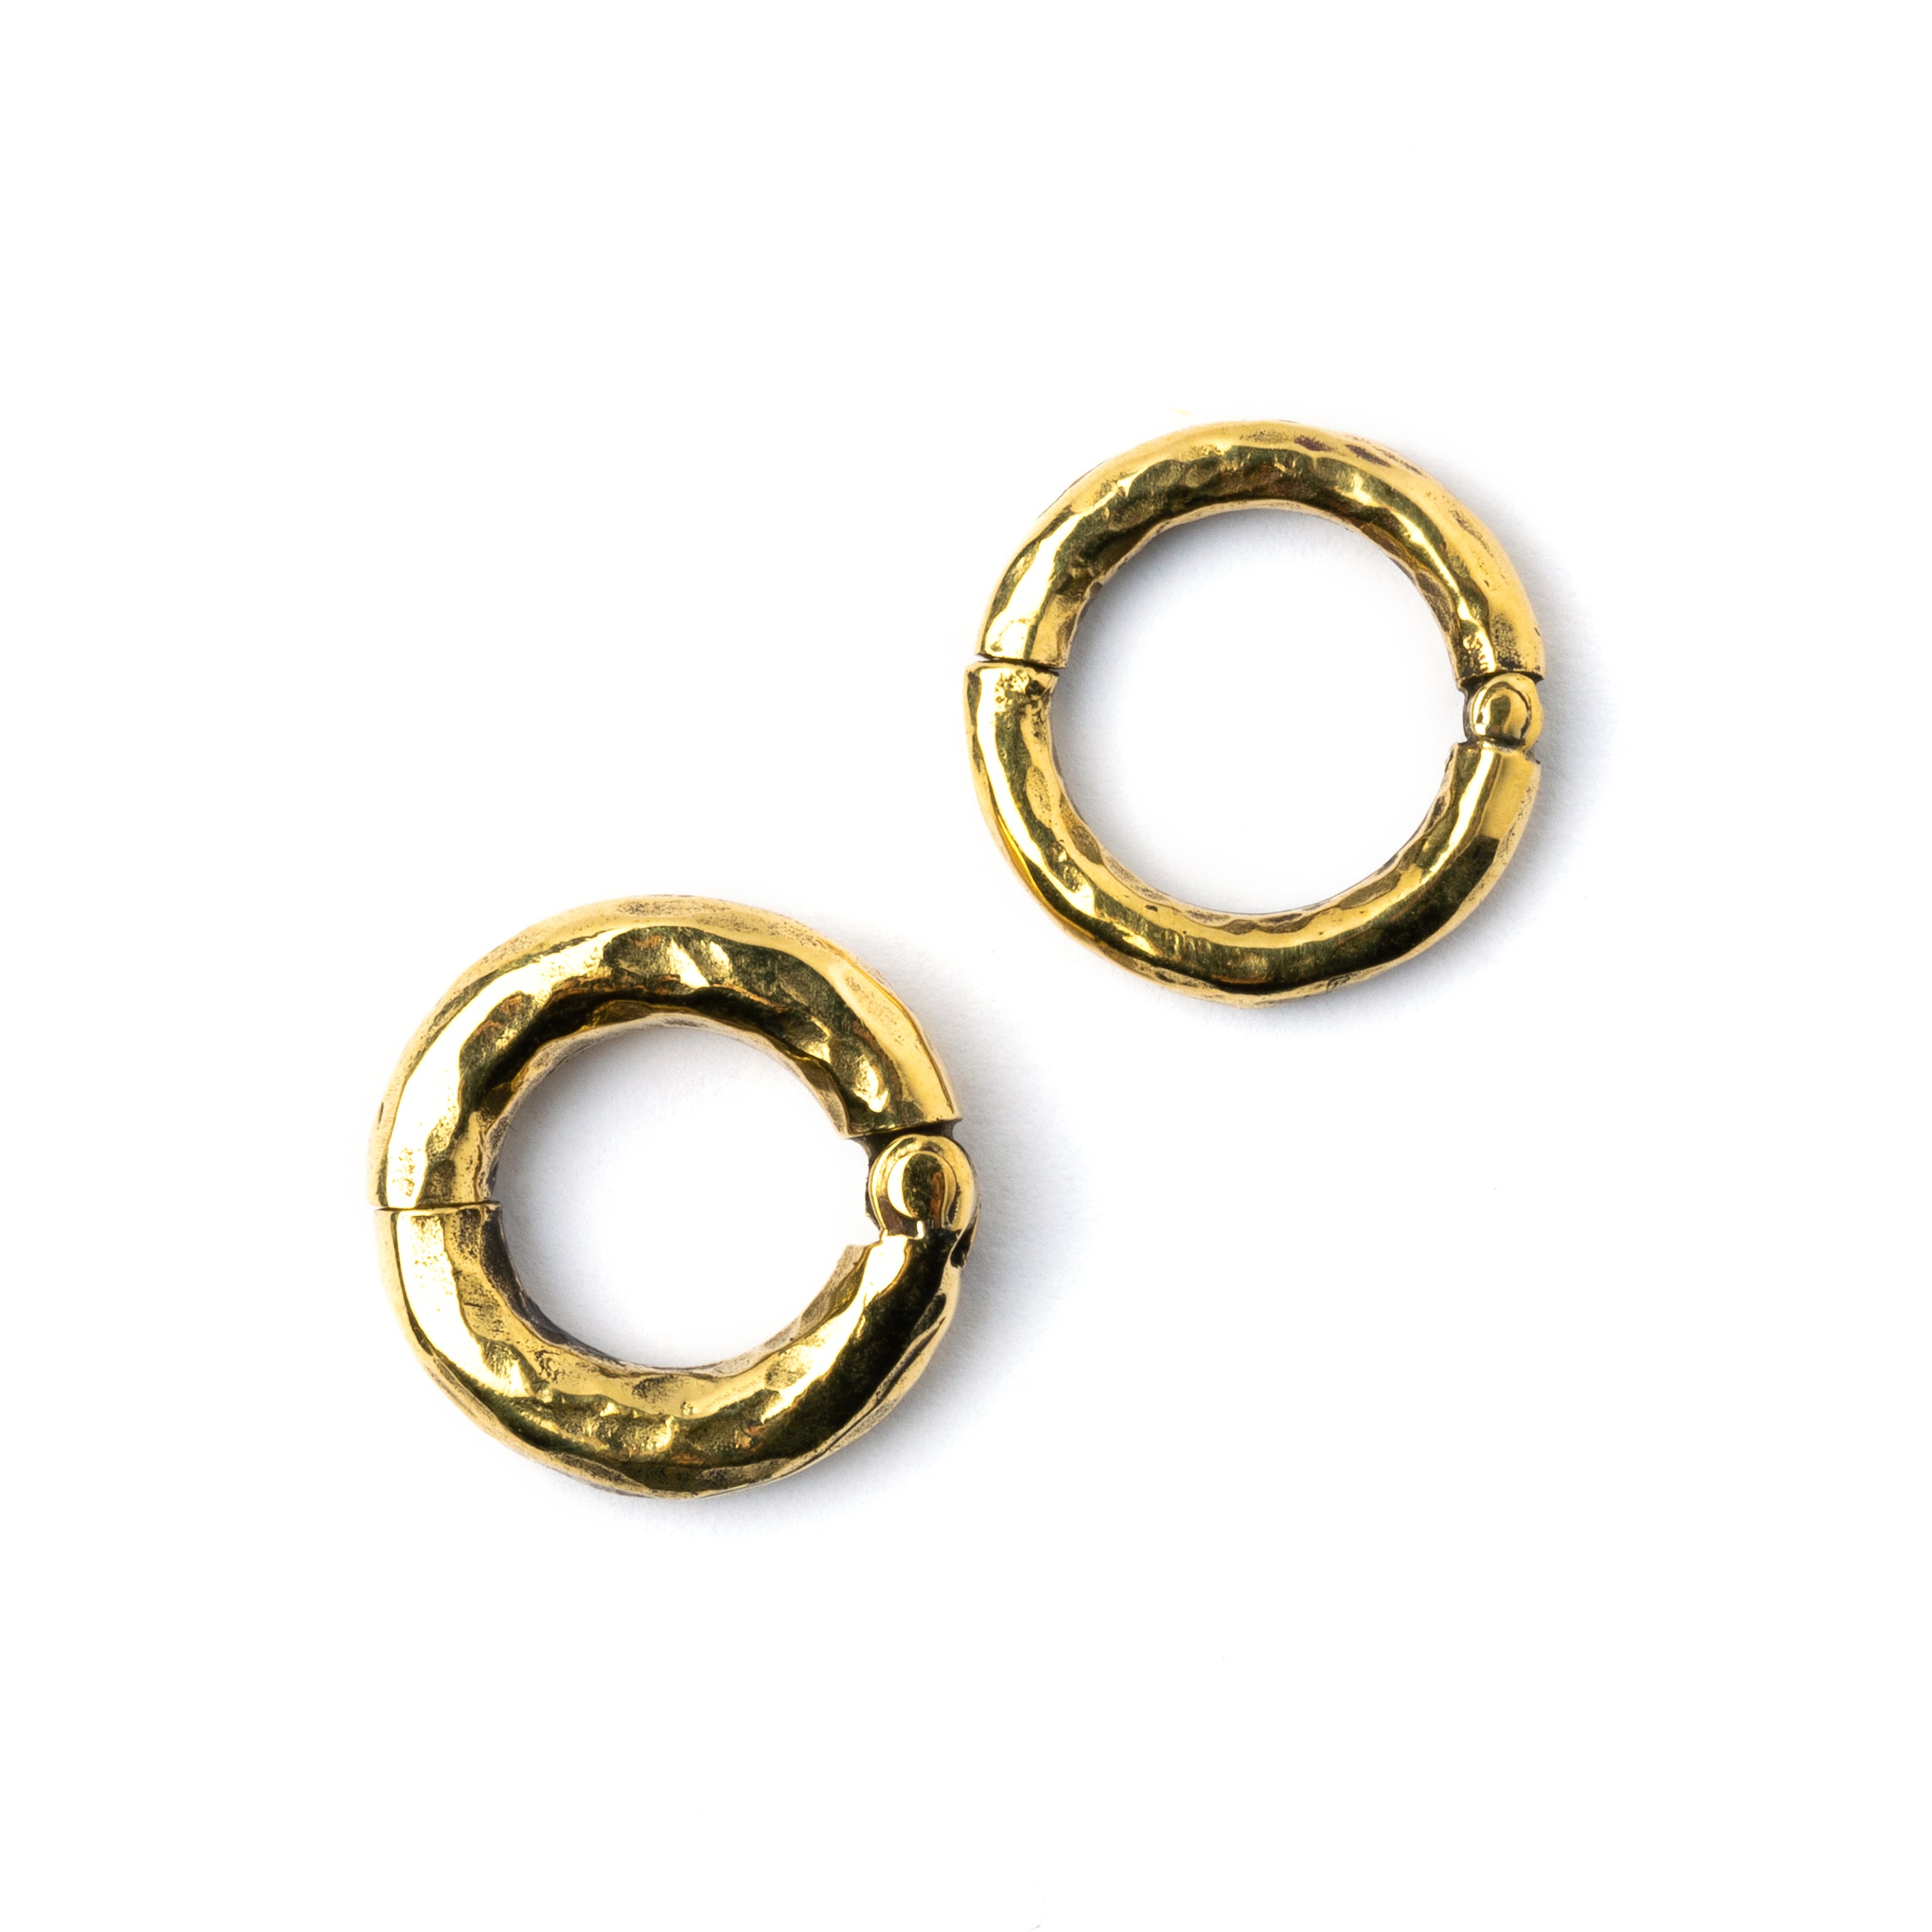 3mm and 4mm gold brass hammered gauge hoops frontal view